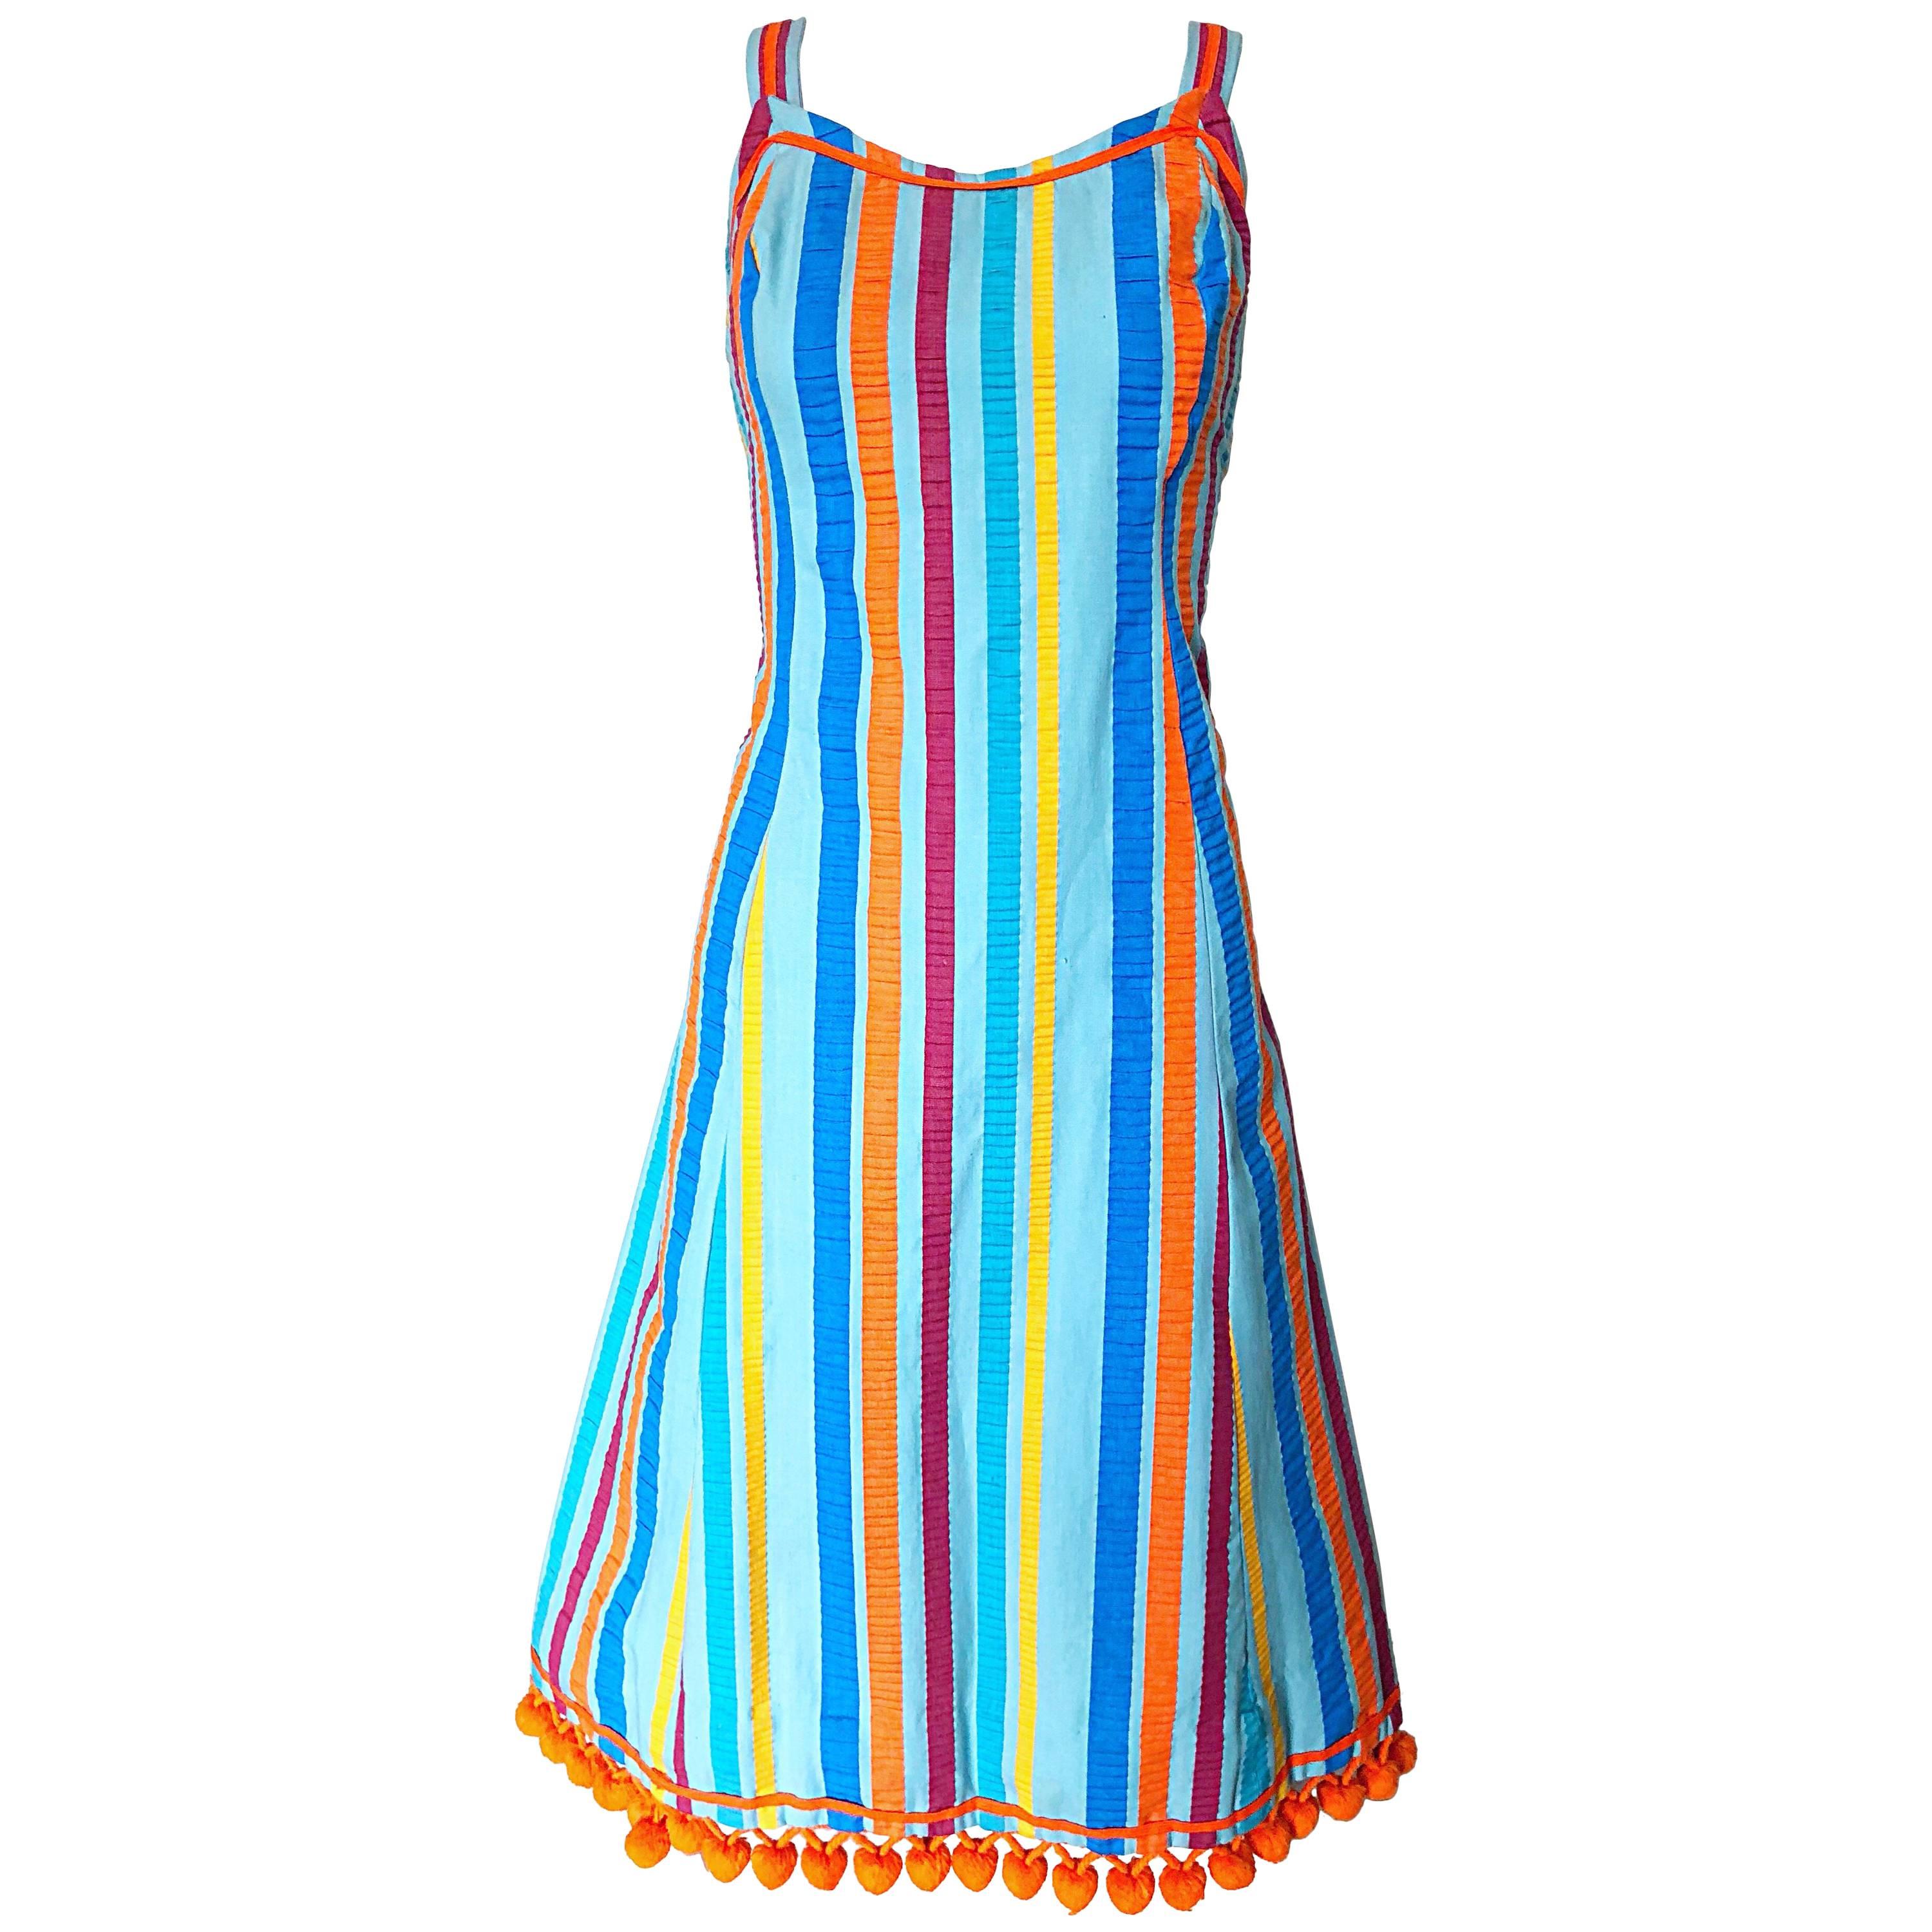 Whimsical 1960s Toby Tanner Colorful Striped ' Pom Pom ' Cotton 60s A Line Dress